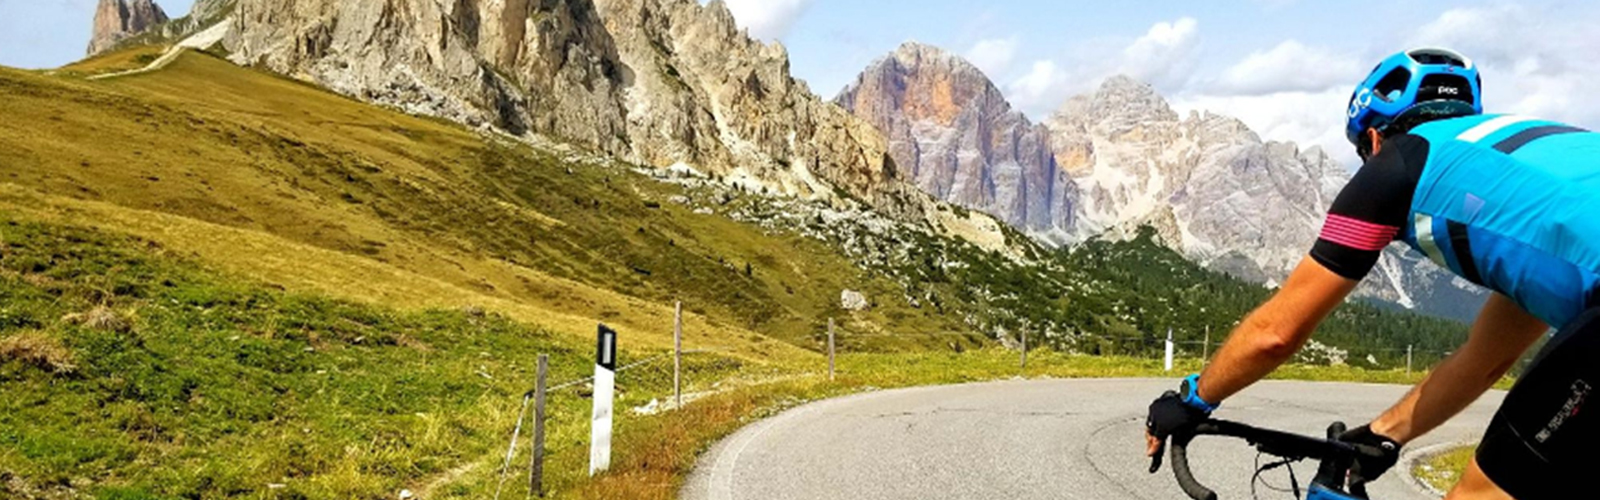 Cycle the Dolomites & Italian Alps: Road Cycling